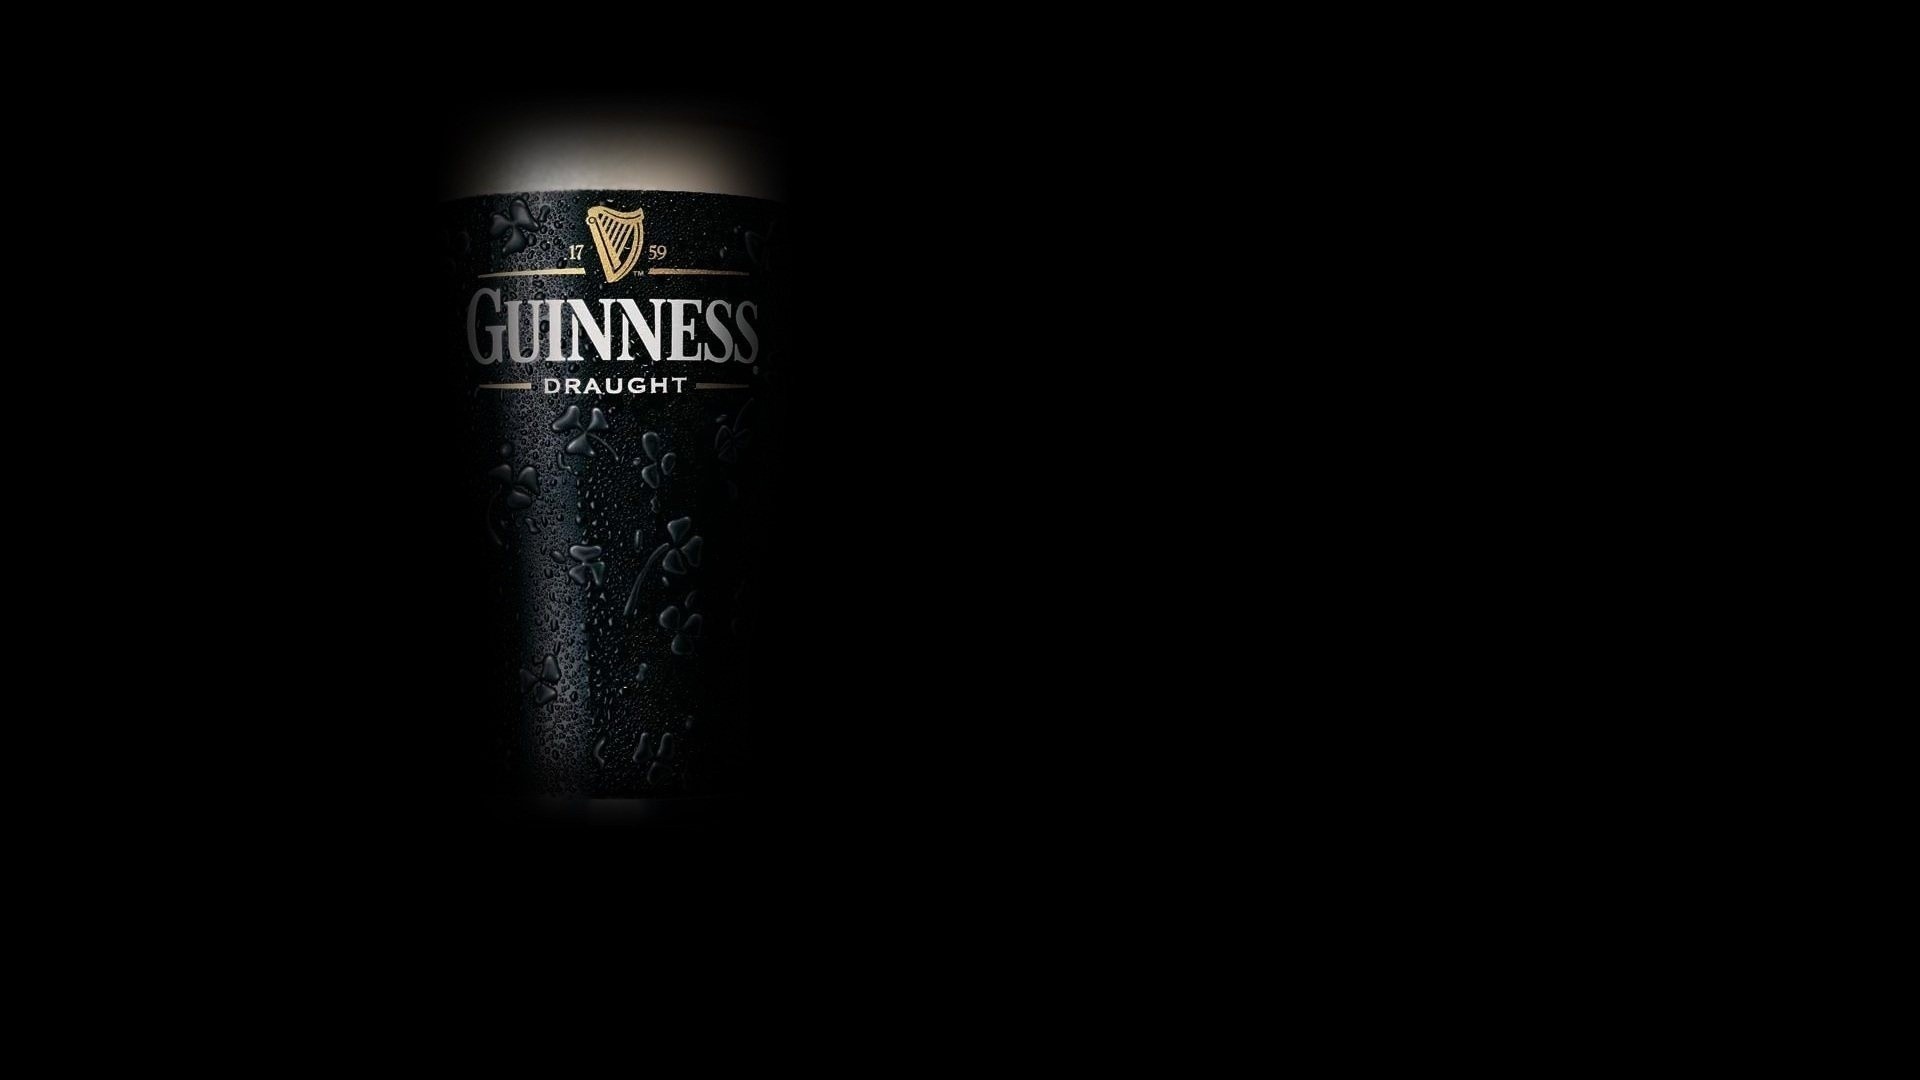 General 1920x1080 beer Guinness black background beverages dark simple background alcohol numbers logo drinking glass